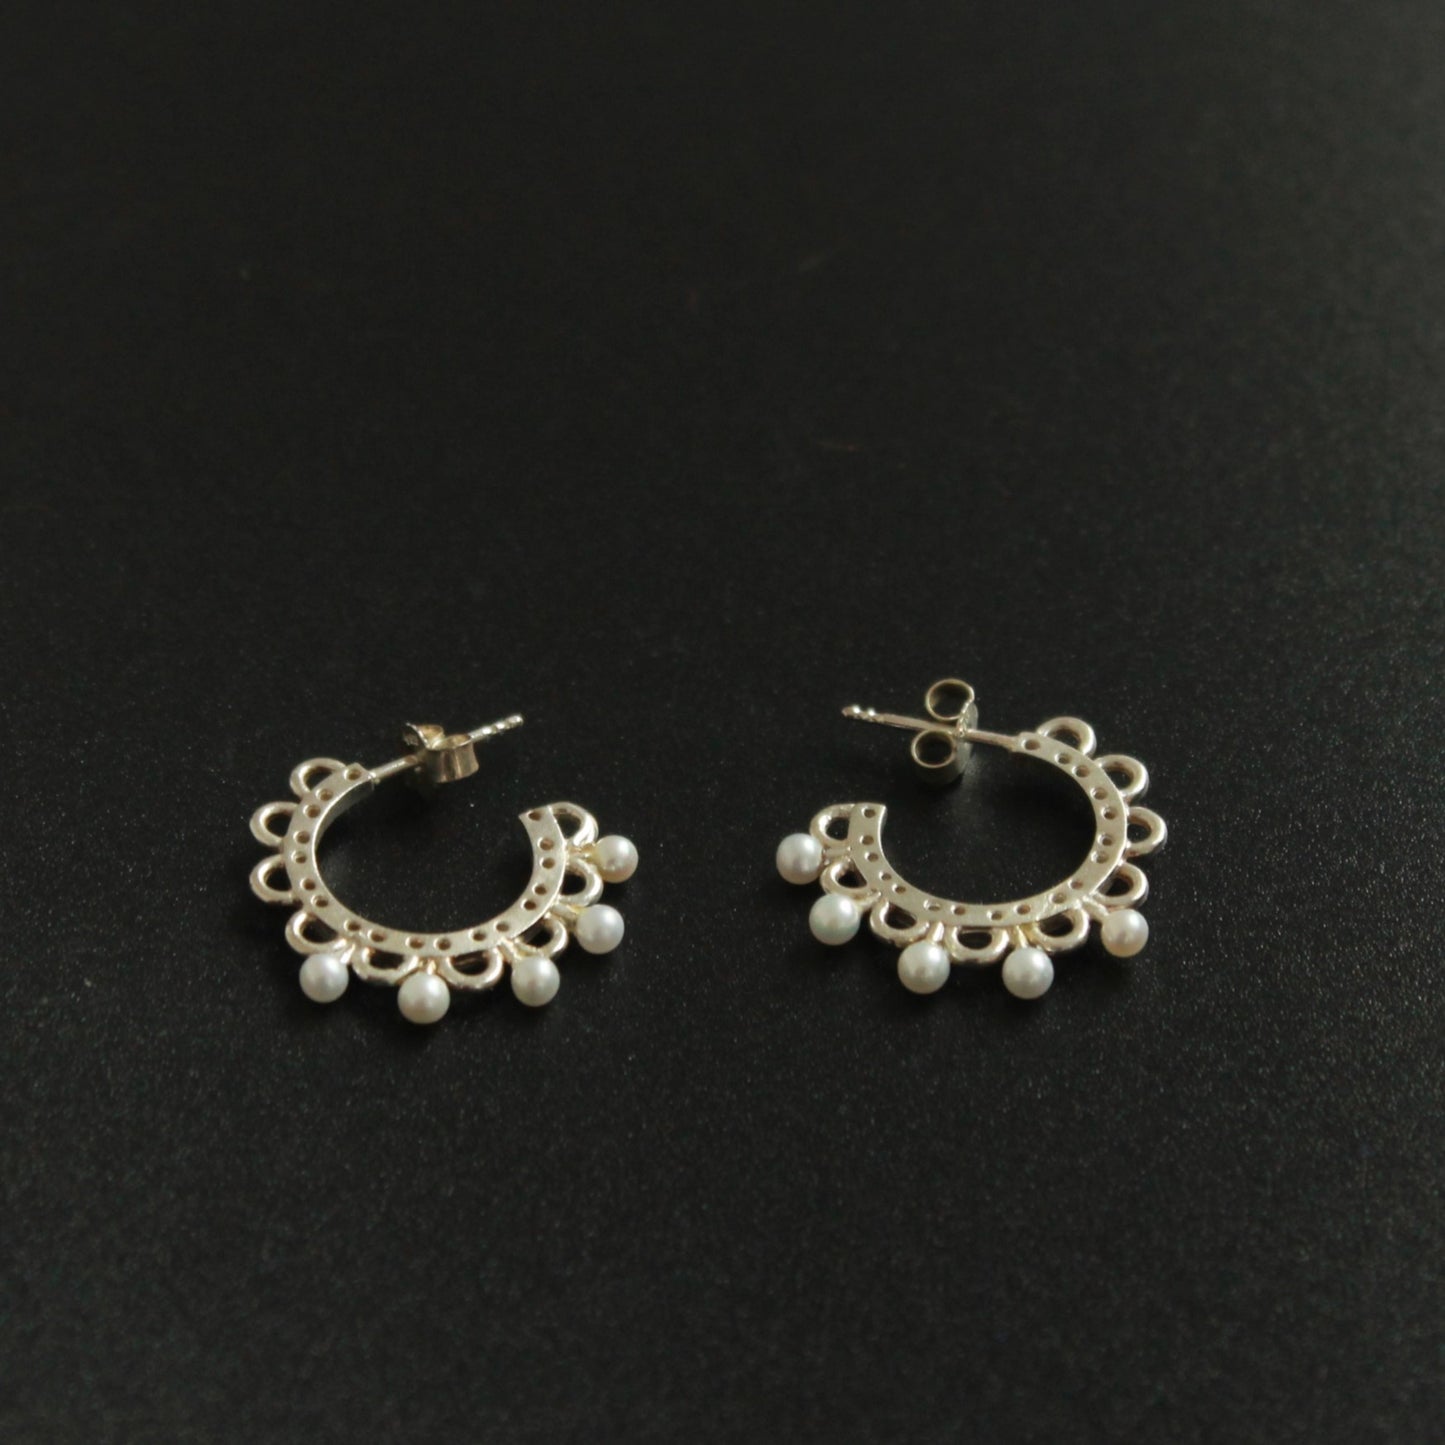 Limerick Lace Inspired Silver and Pearl Earrings - Marianne Kenny